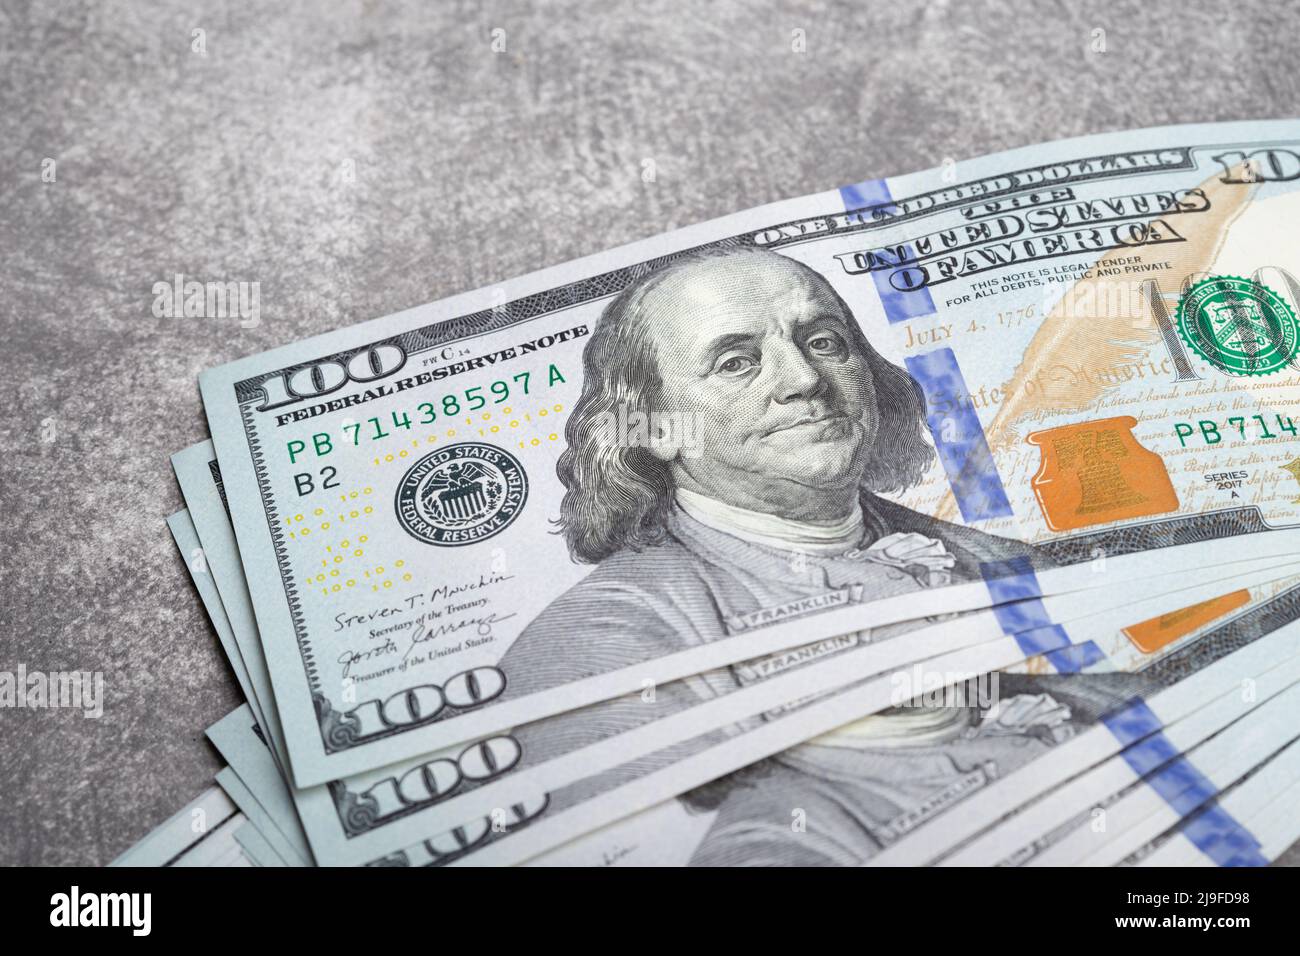 American dollar bills on grey stone background. Top view with copy space. Stock Photo